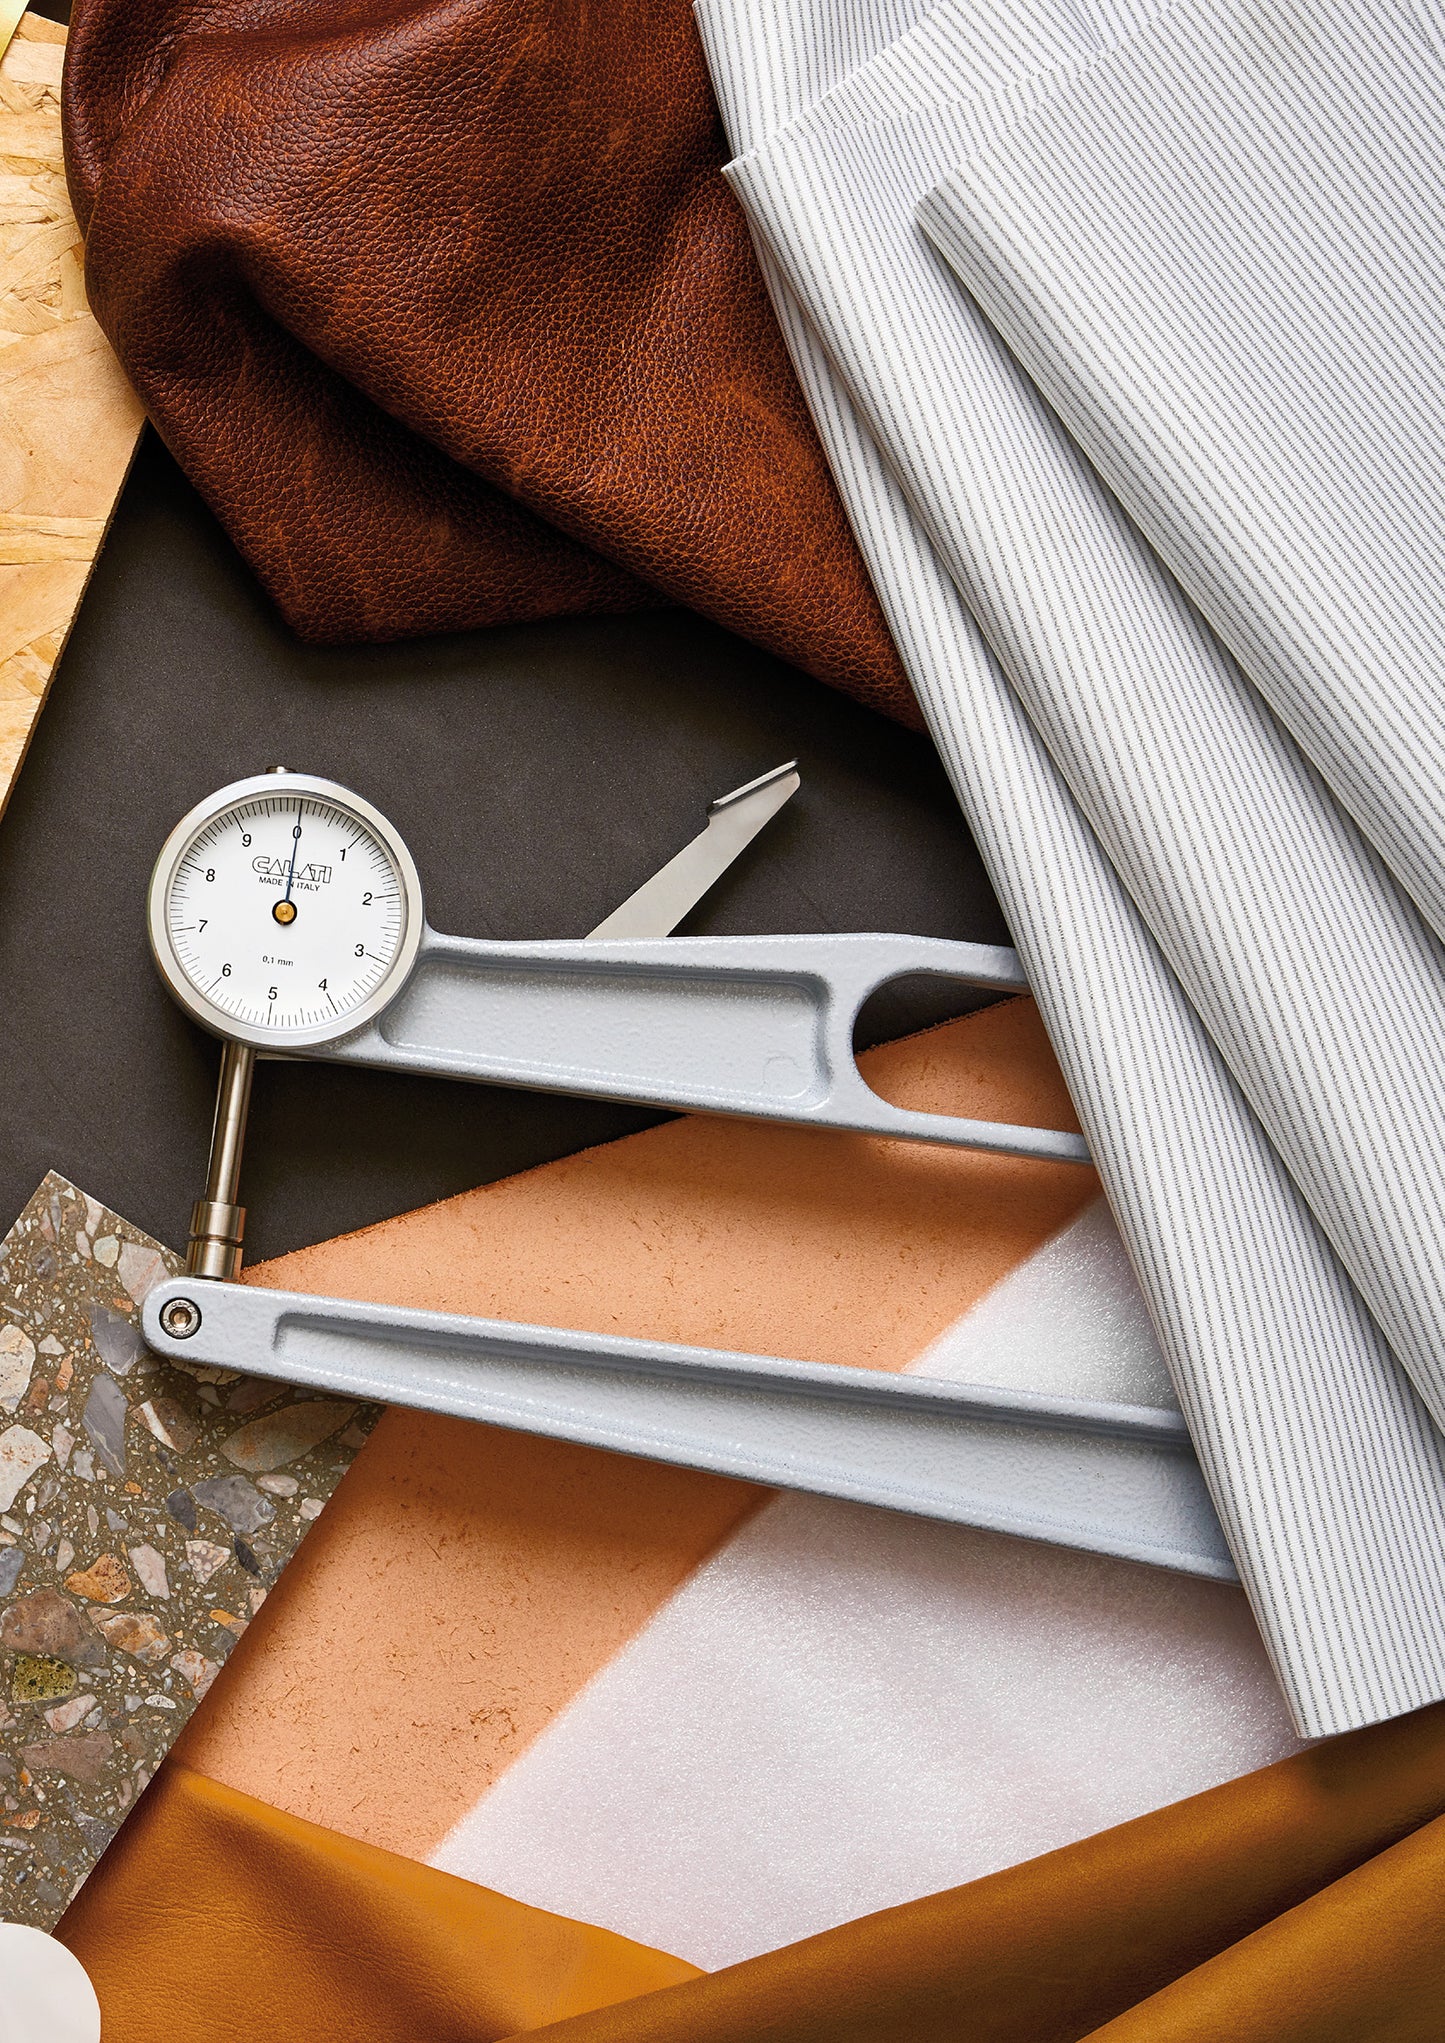 CALATI Analog Leather Thickness Gauge (Made in Italy)